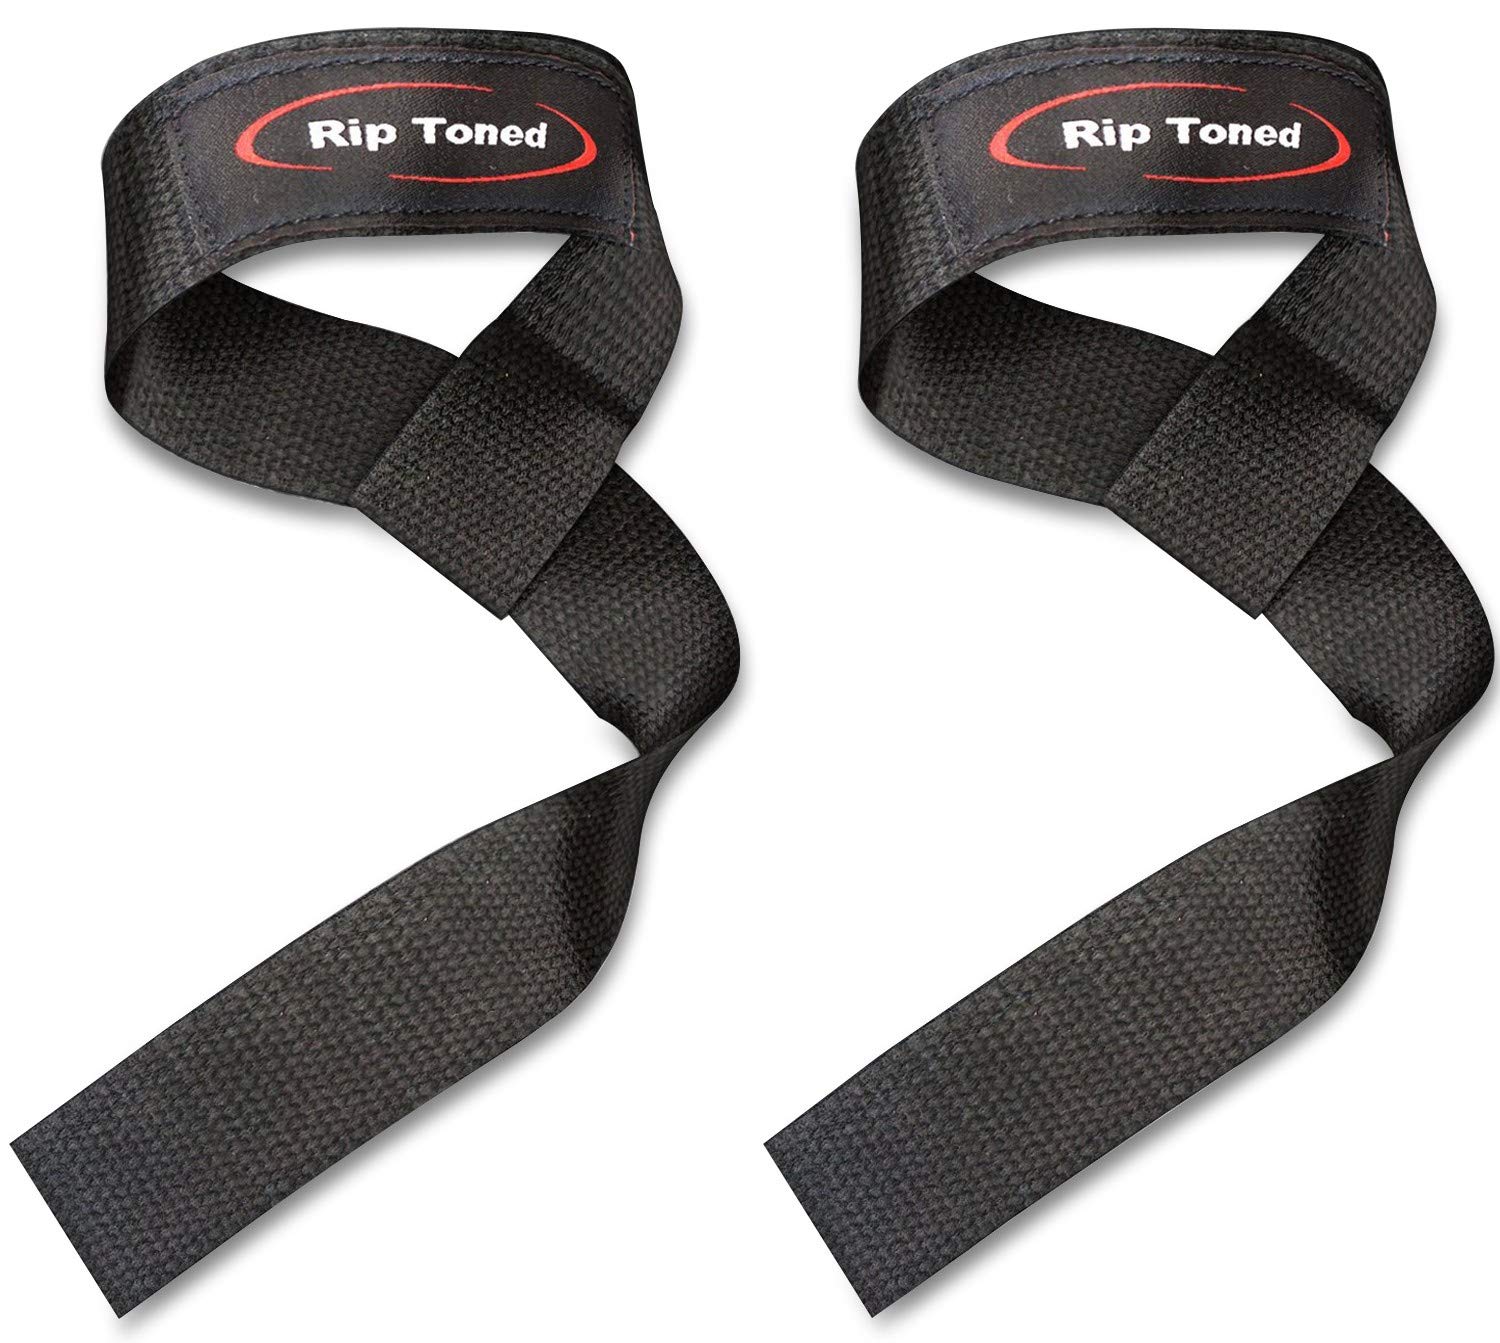 Rip Toned Lifting Wrist Straps (Pair) for Weightlifting, Bodybuilding, Powerlifting, Xfit, Strength Training, Deadlifts, MMA - Neoprene Padded - 23” Cotton Straps - Men or Women